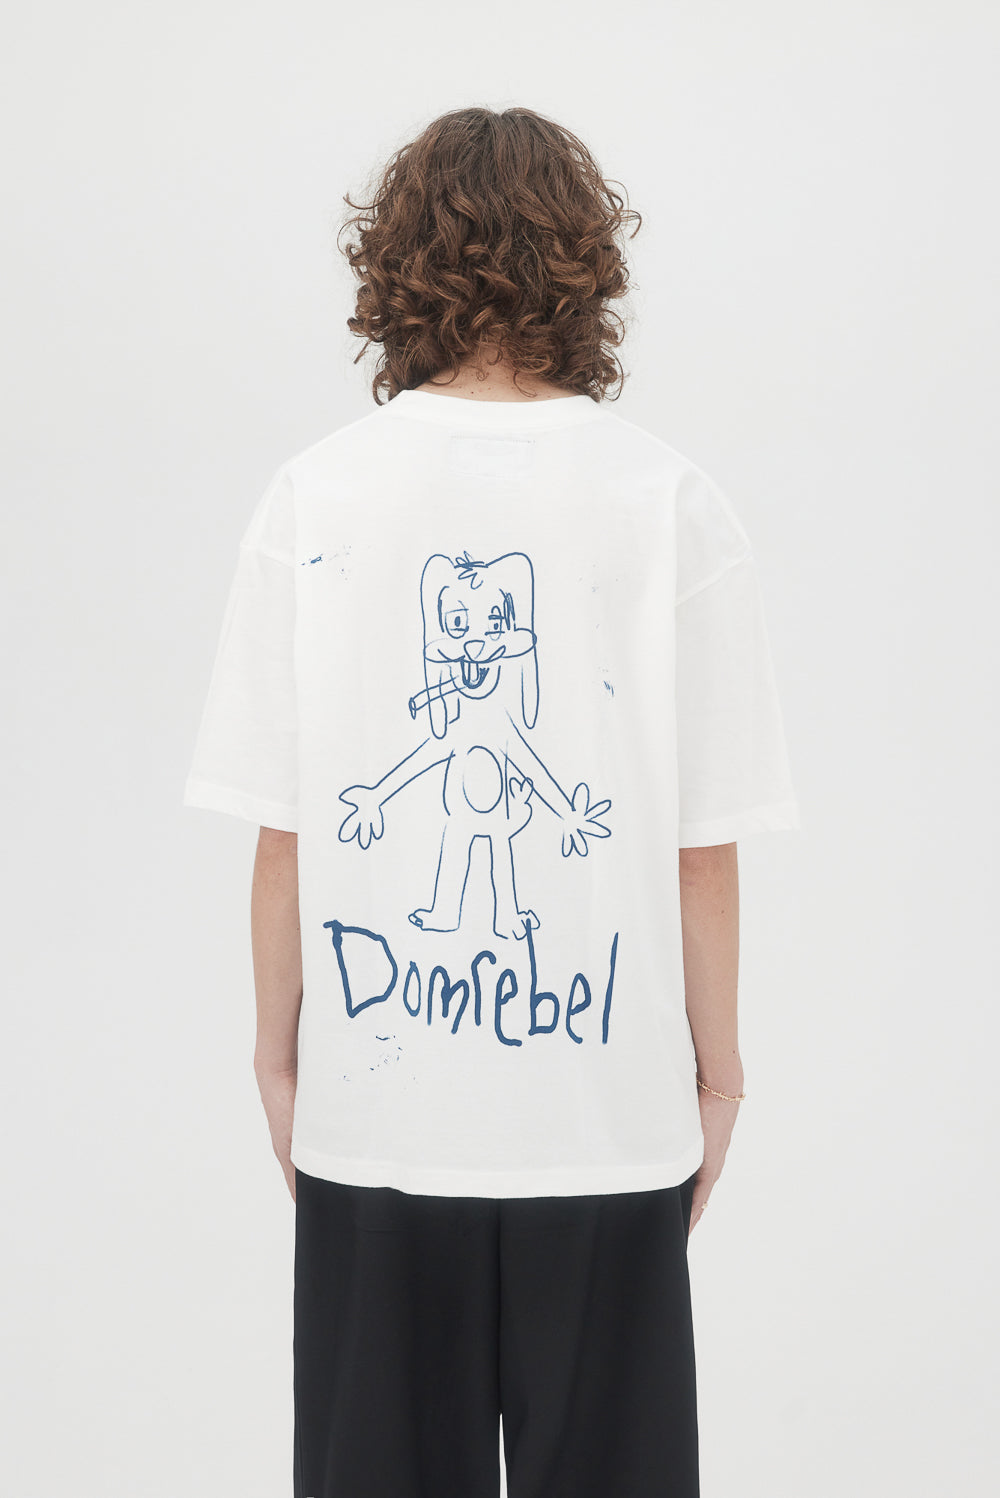 Buy the Domrebel Willy T-Shirt in Ivory at Intro. Spend £50 for free UK delivery. Official stockists. We ship worldwide.